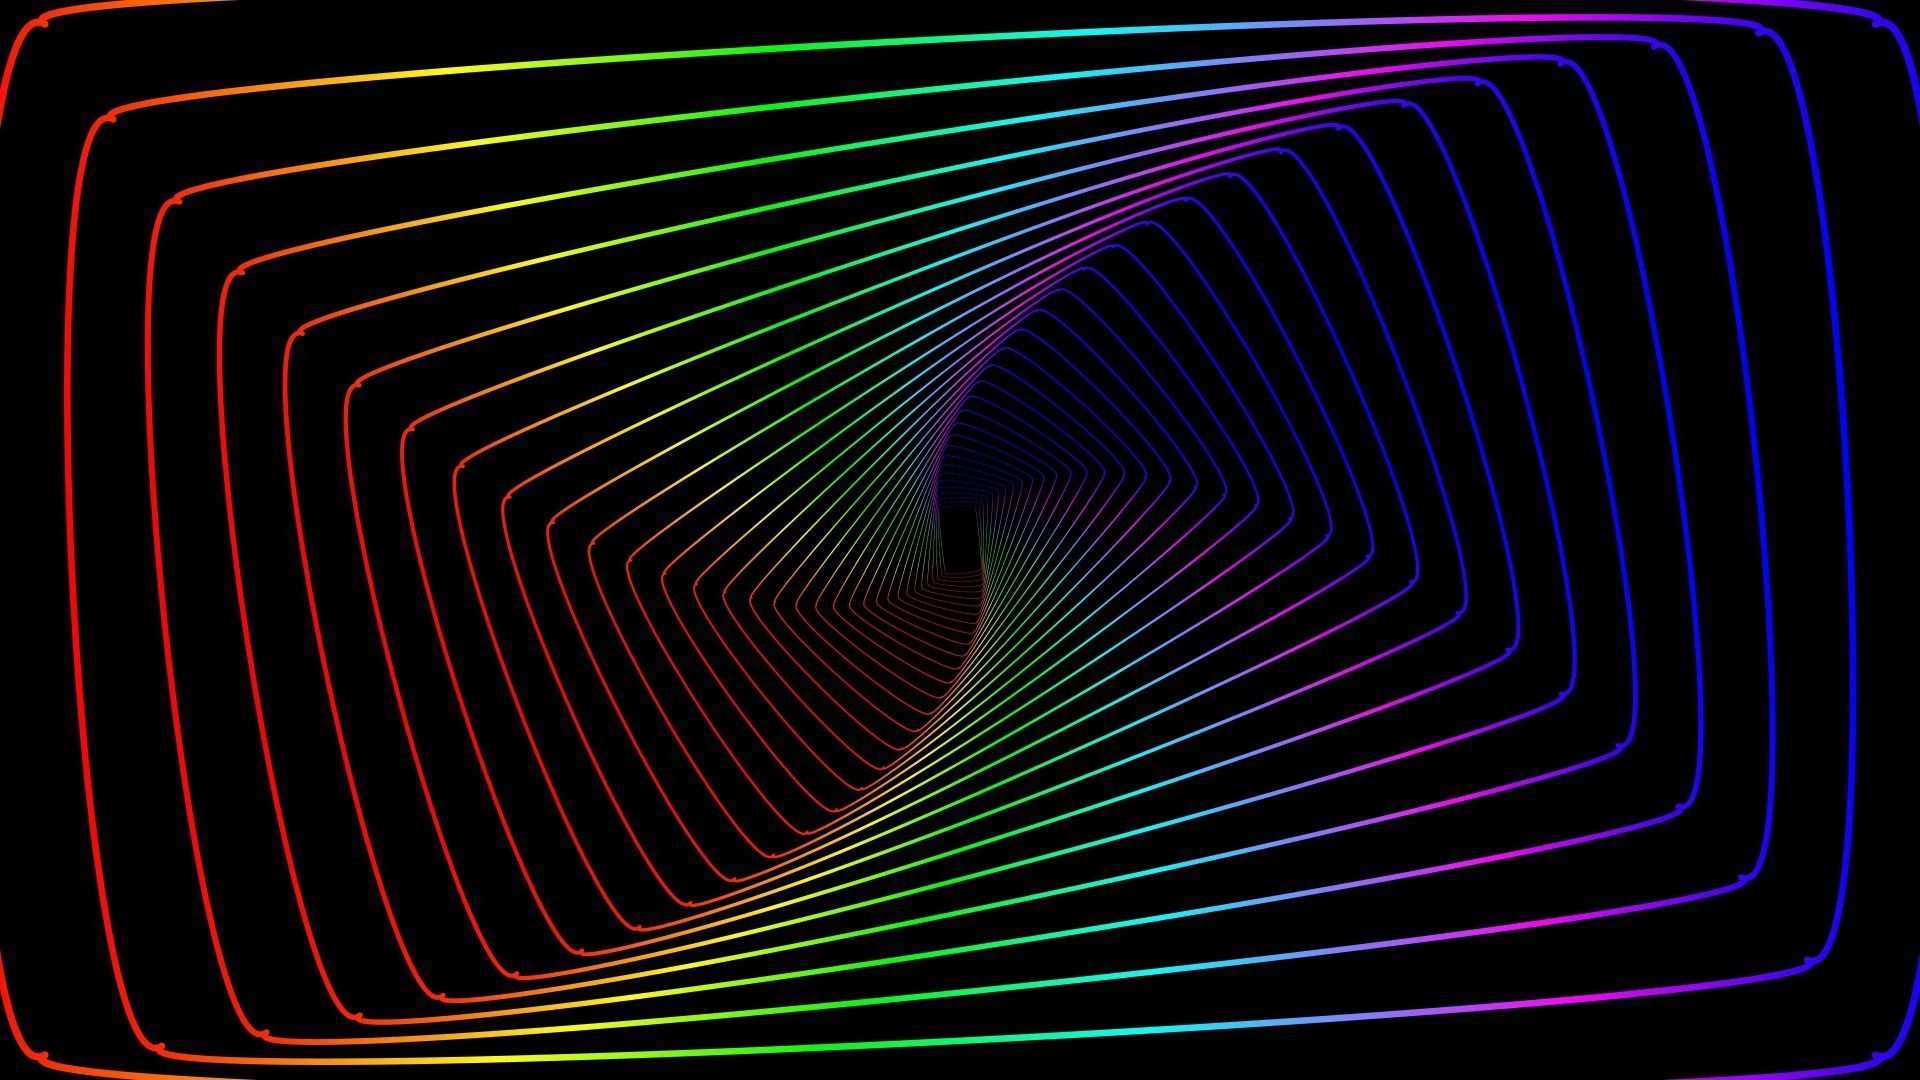 Desktop wallpaper colorful lines, swirl, abstract, minimal, HD image, picture, background, 34e7d6